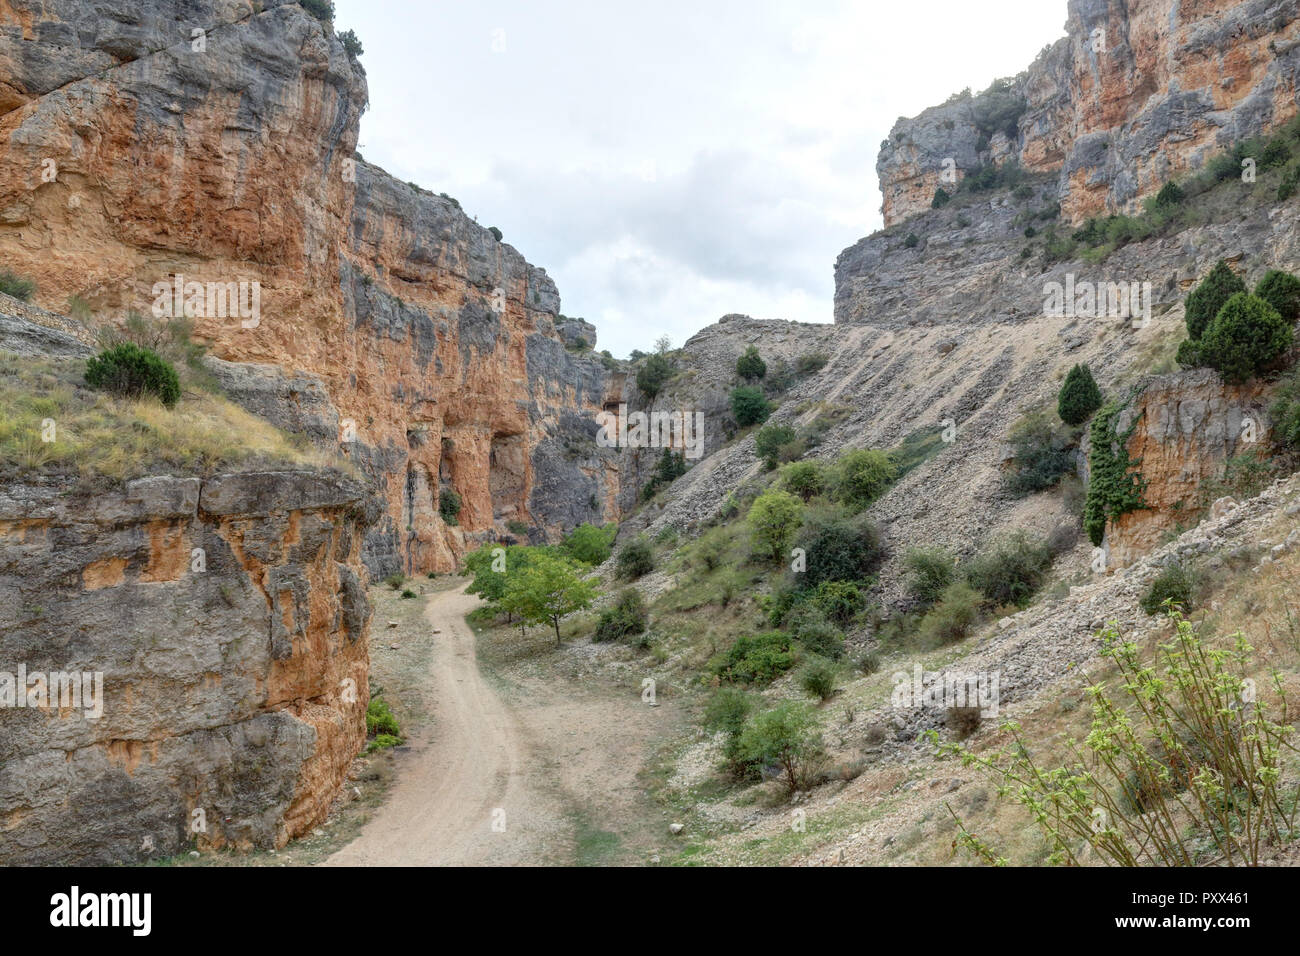 The Barranco de la Hoz Seca (Dry Defile Gully) canyon, with scarps, bushes and red rocks, in a cloudy atumn, in the Jaraba rural town, Aragon, Spain Stock Photo